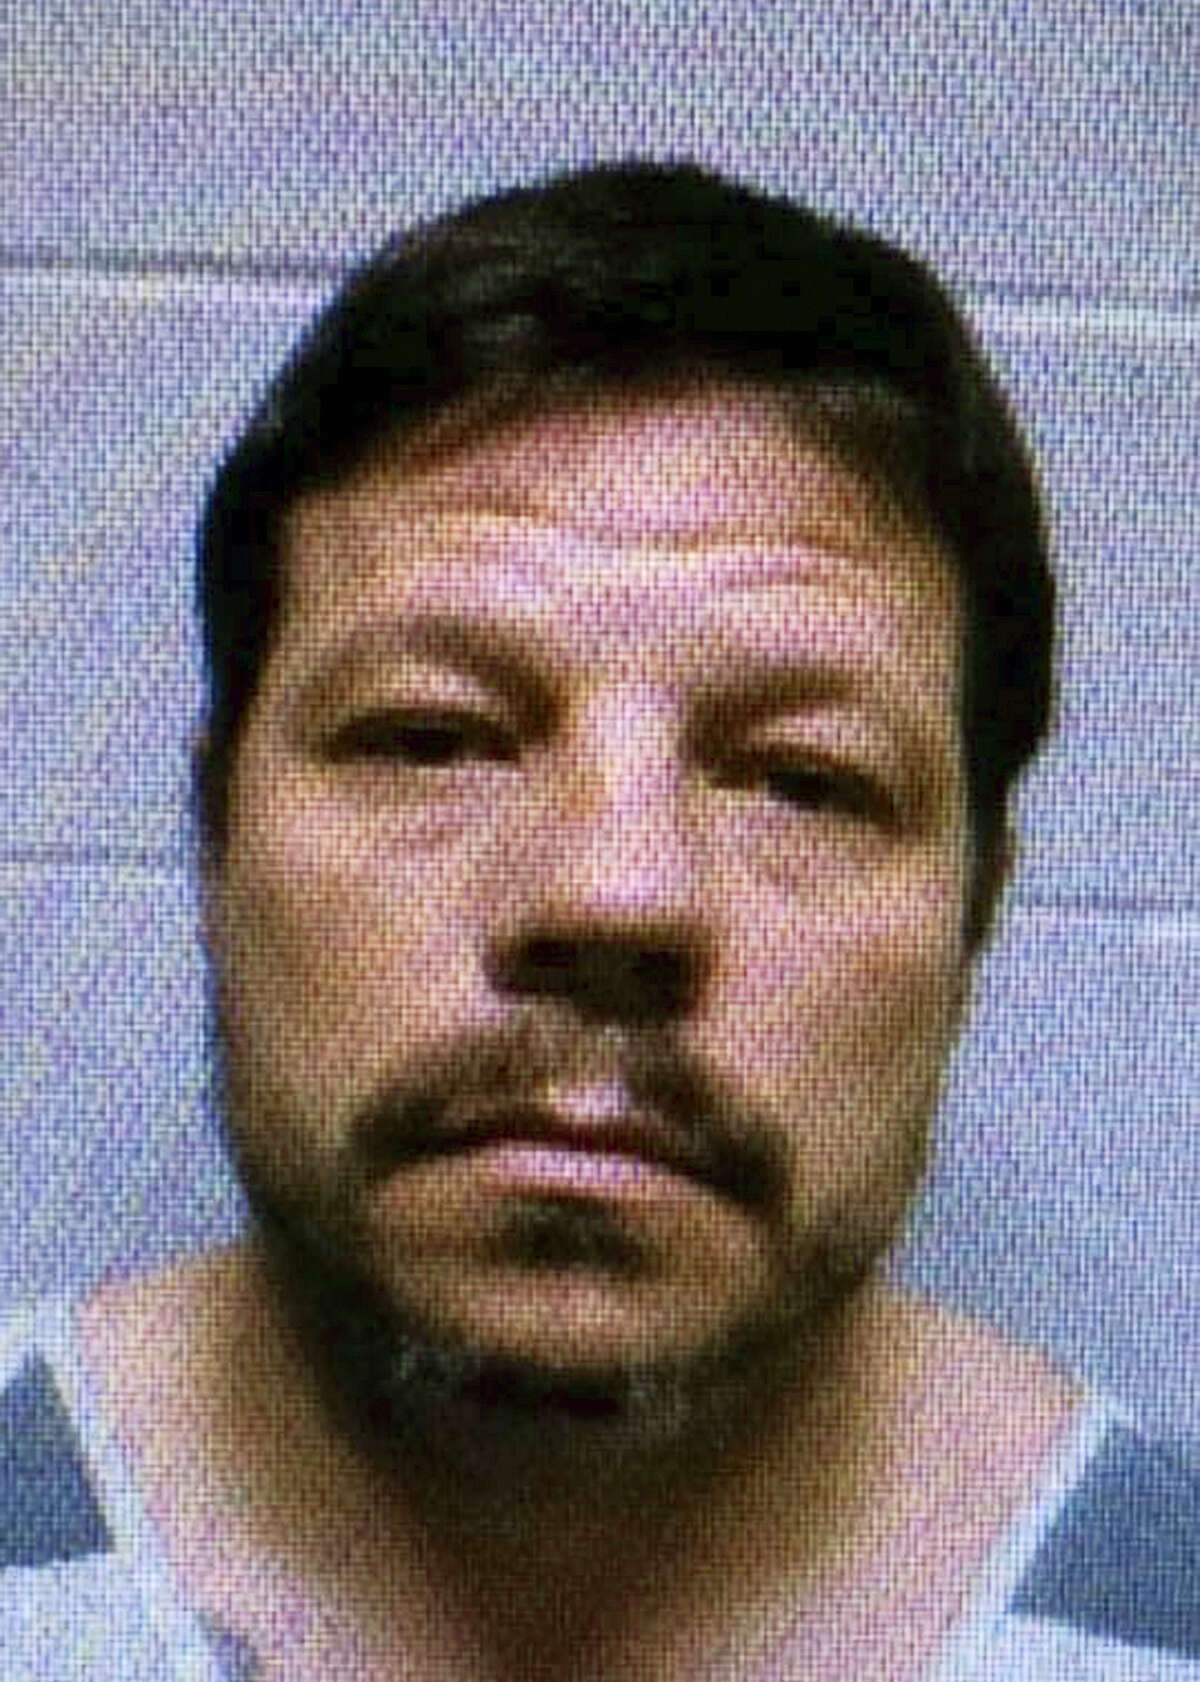 This undated file photo provided by the Lincoln County Sheriff’s Office shows Michael Vance. Vance, the subject of a weeklong manhunt who was wanted in a string of violent crimes, including the killing of two relatives, the shooting of two Oklahoma police officers and multiple carjackings, has been killed in a shootout, federal and local police said on Oct. 30, 2016.